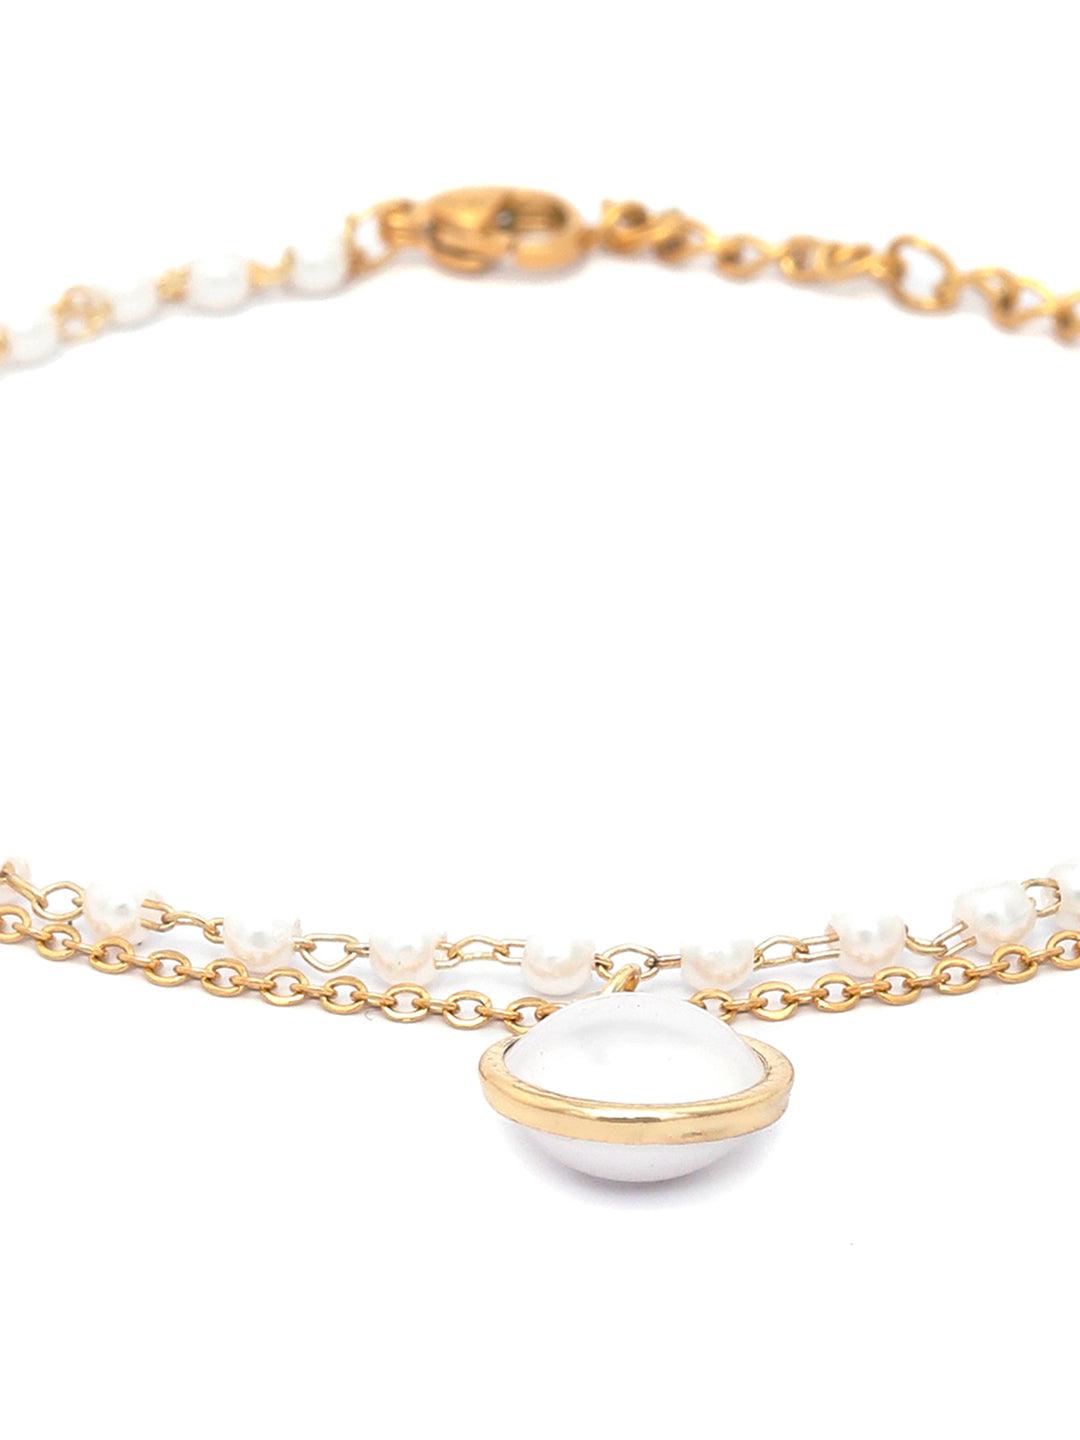 Women's White Pearls & Beads Gold Plated Link Bracelet- Priyaasi - Indiakreations